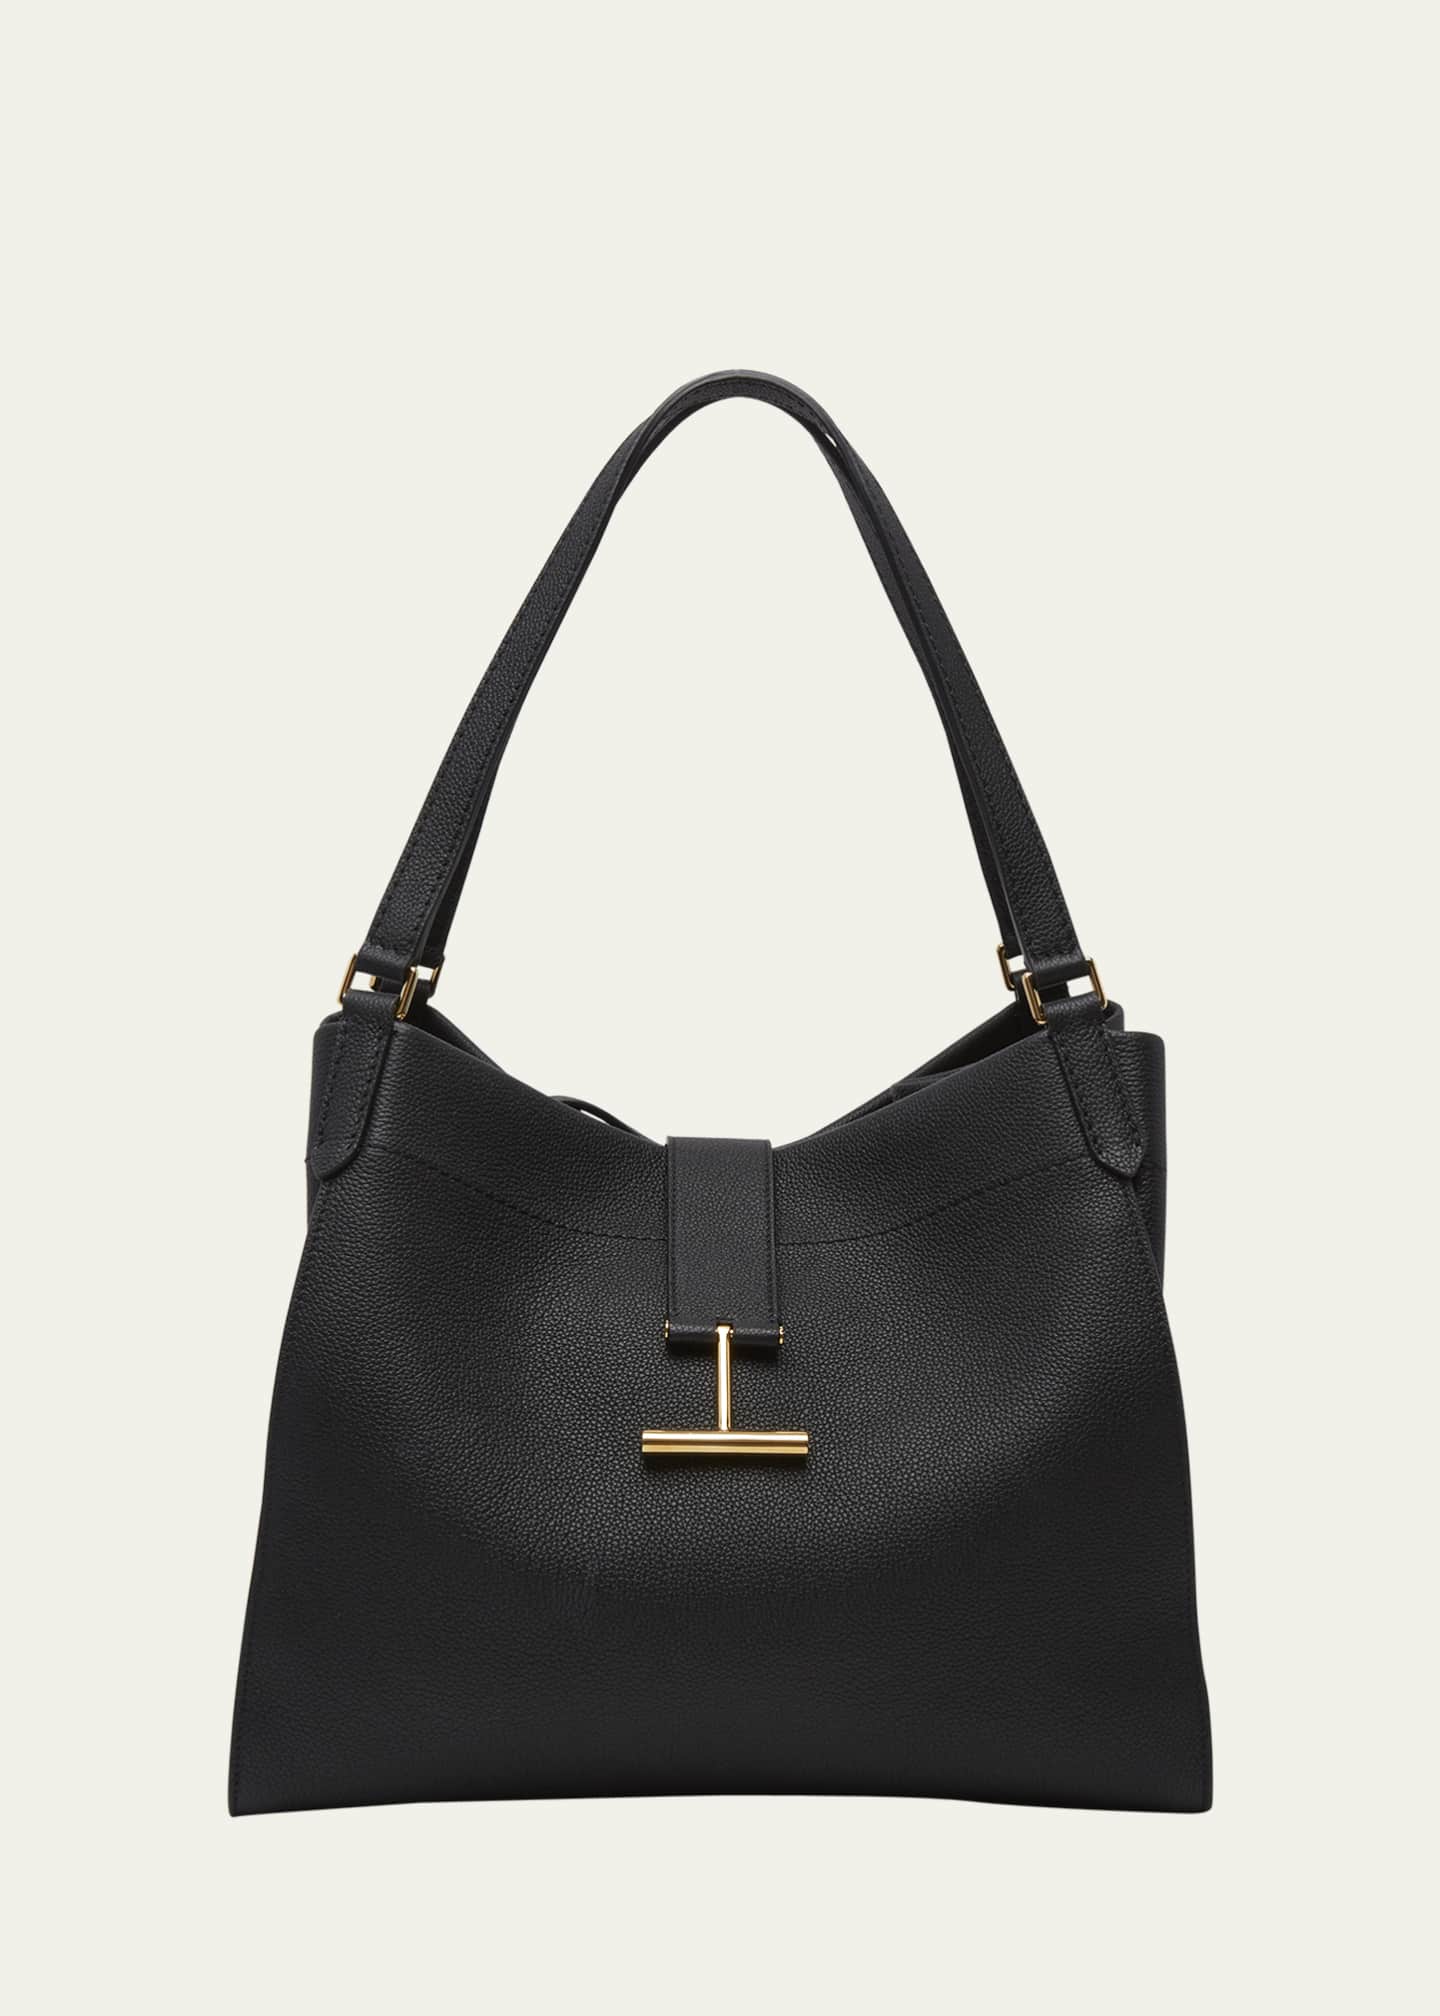 TOM FORD Tara Large Tote in Grained Leather - Bergdorf Goodman